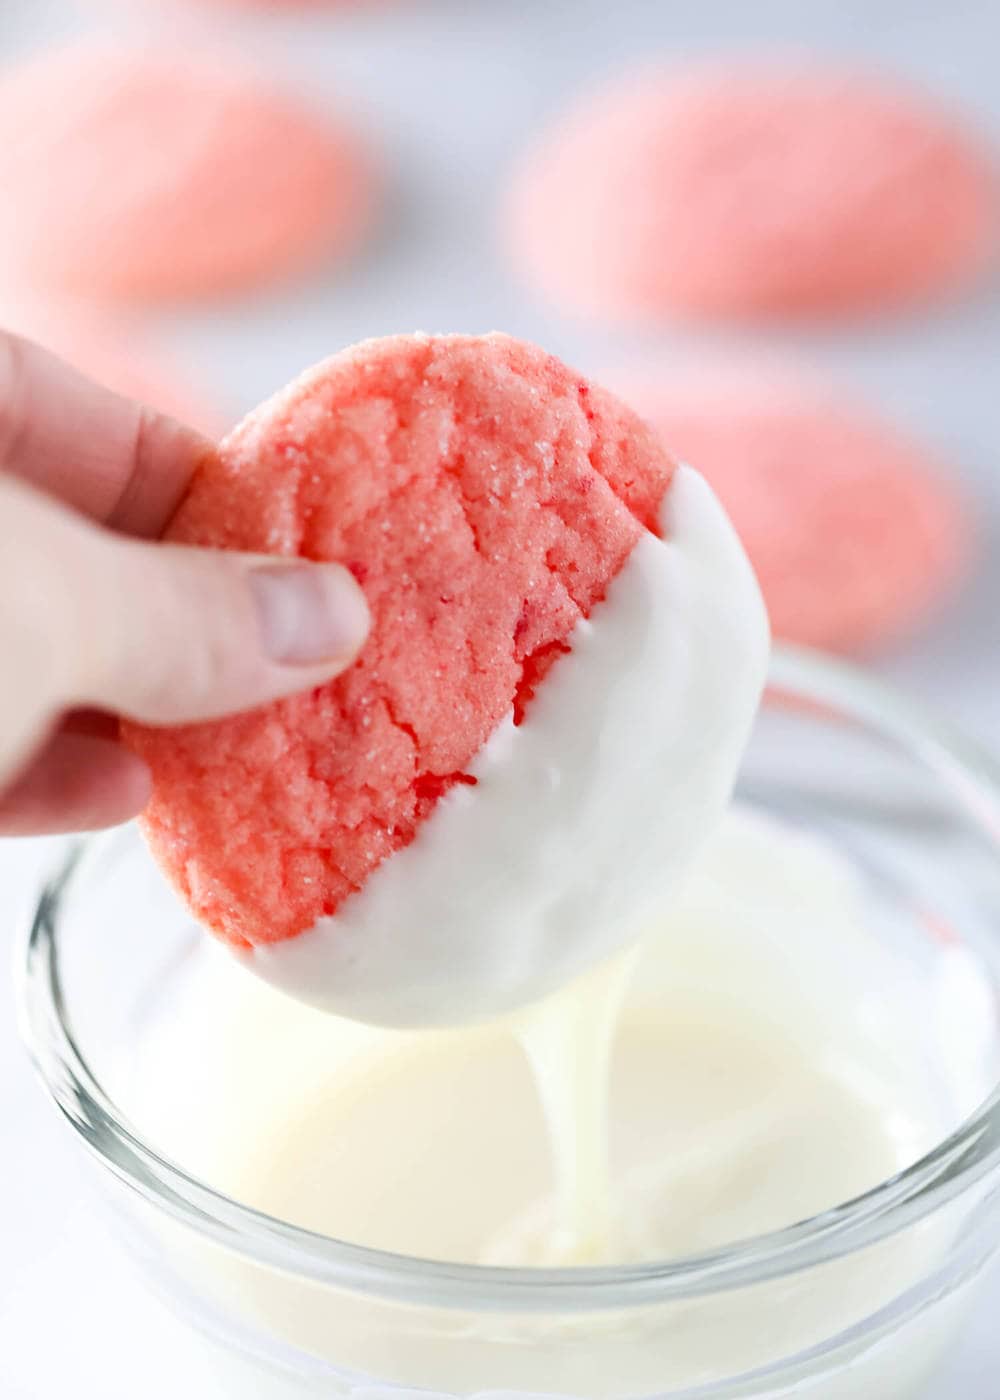 Dipping strawberry cookies in white chocolate.